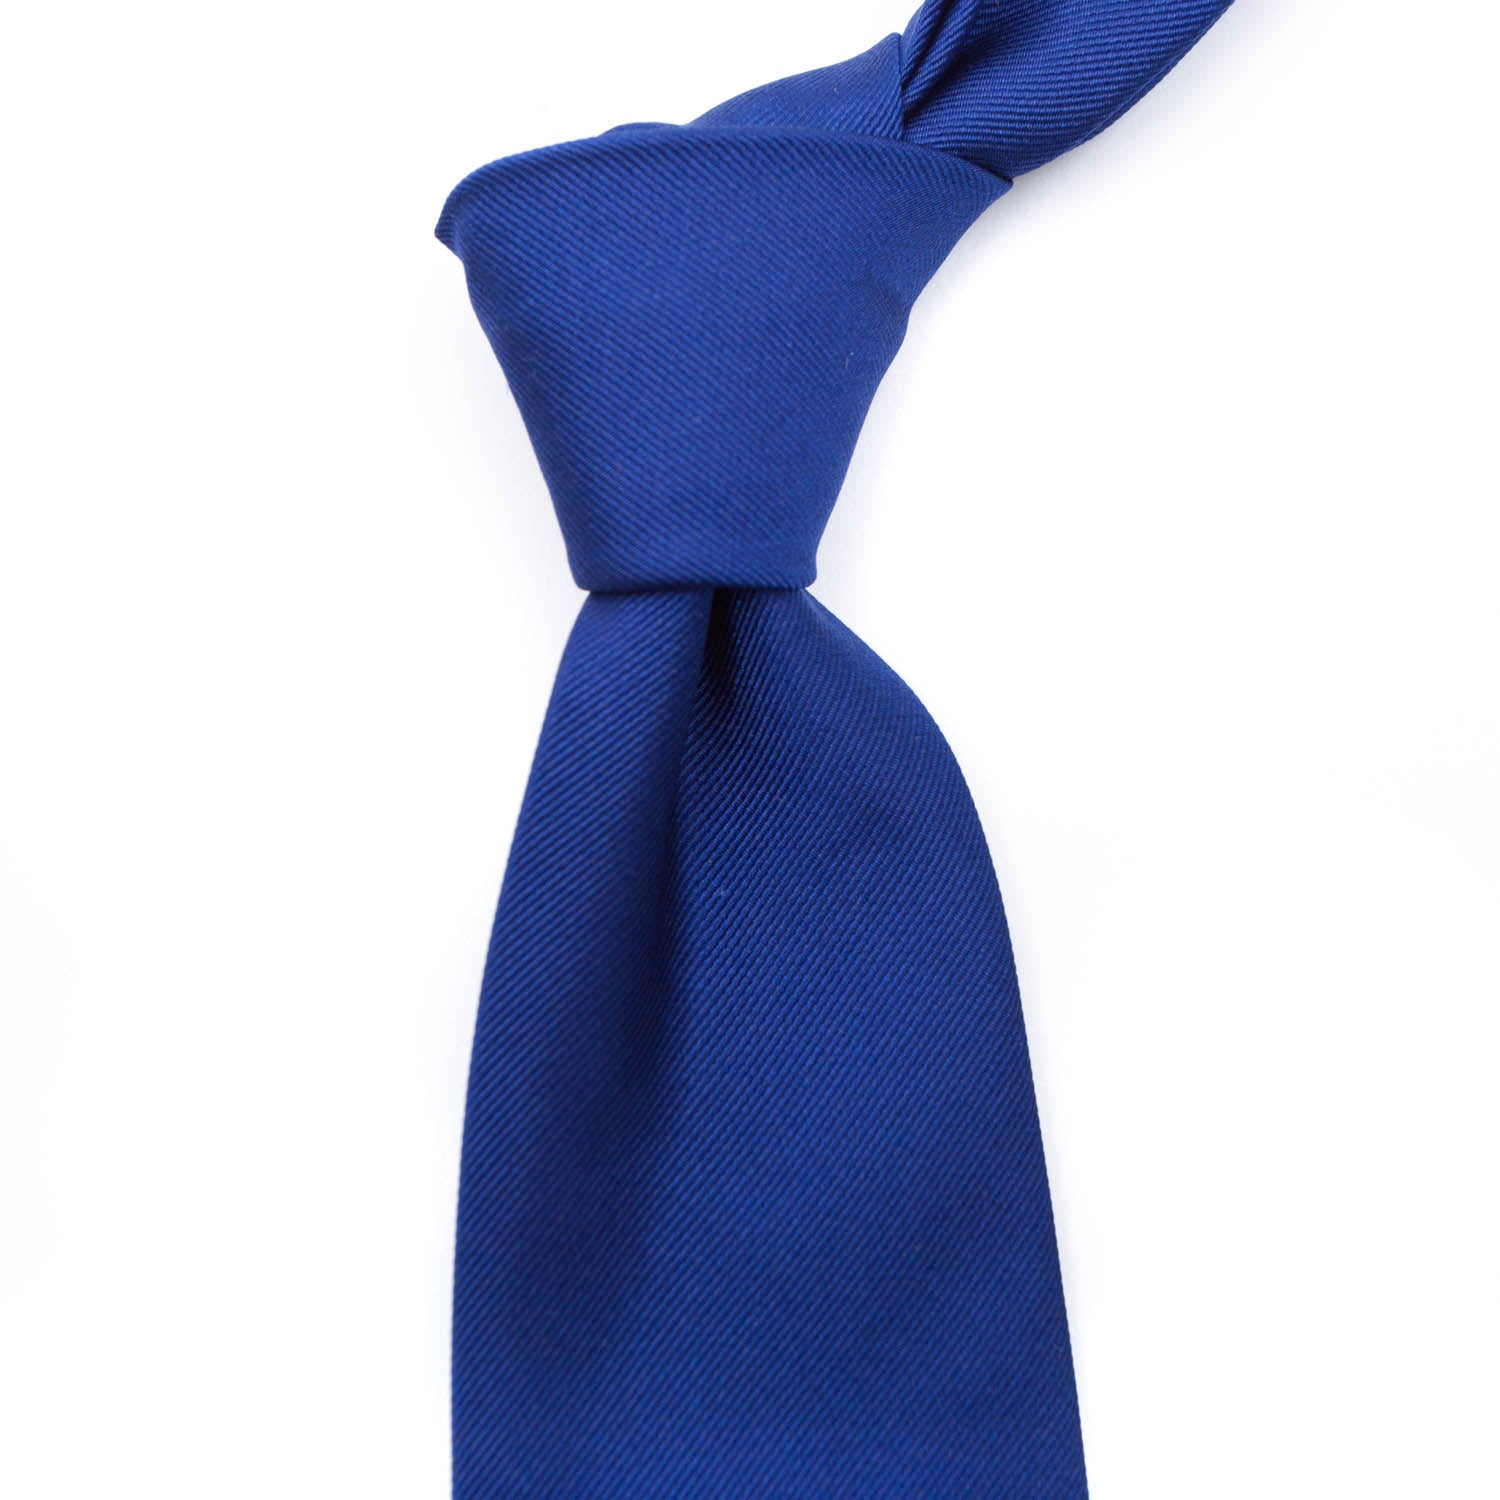 A handmade Sovereign Grade Blue Satin Tie on a white background, featuring KirbyAllison.com's quality and superior longevity.